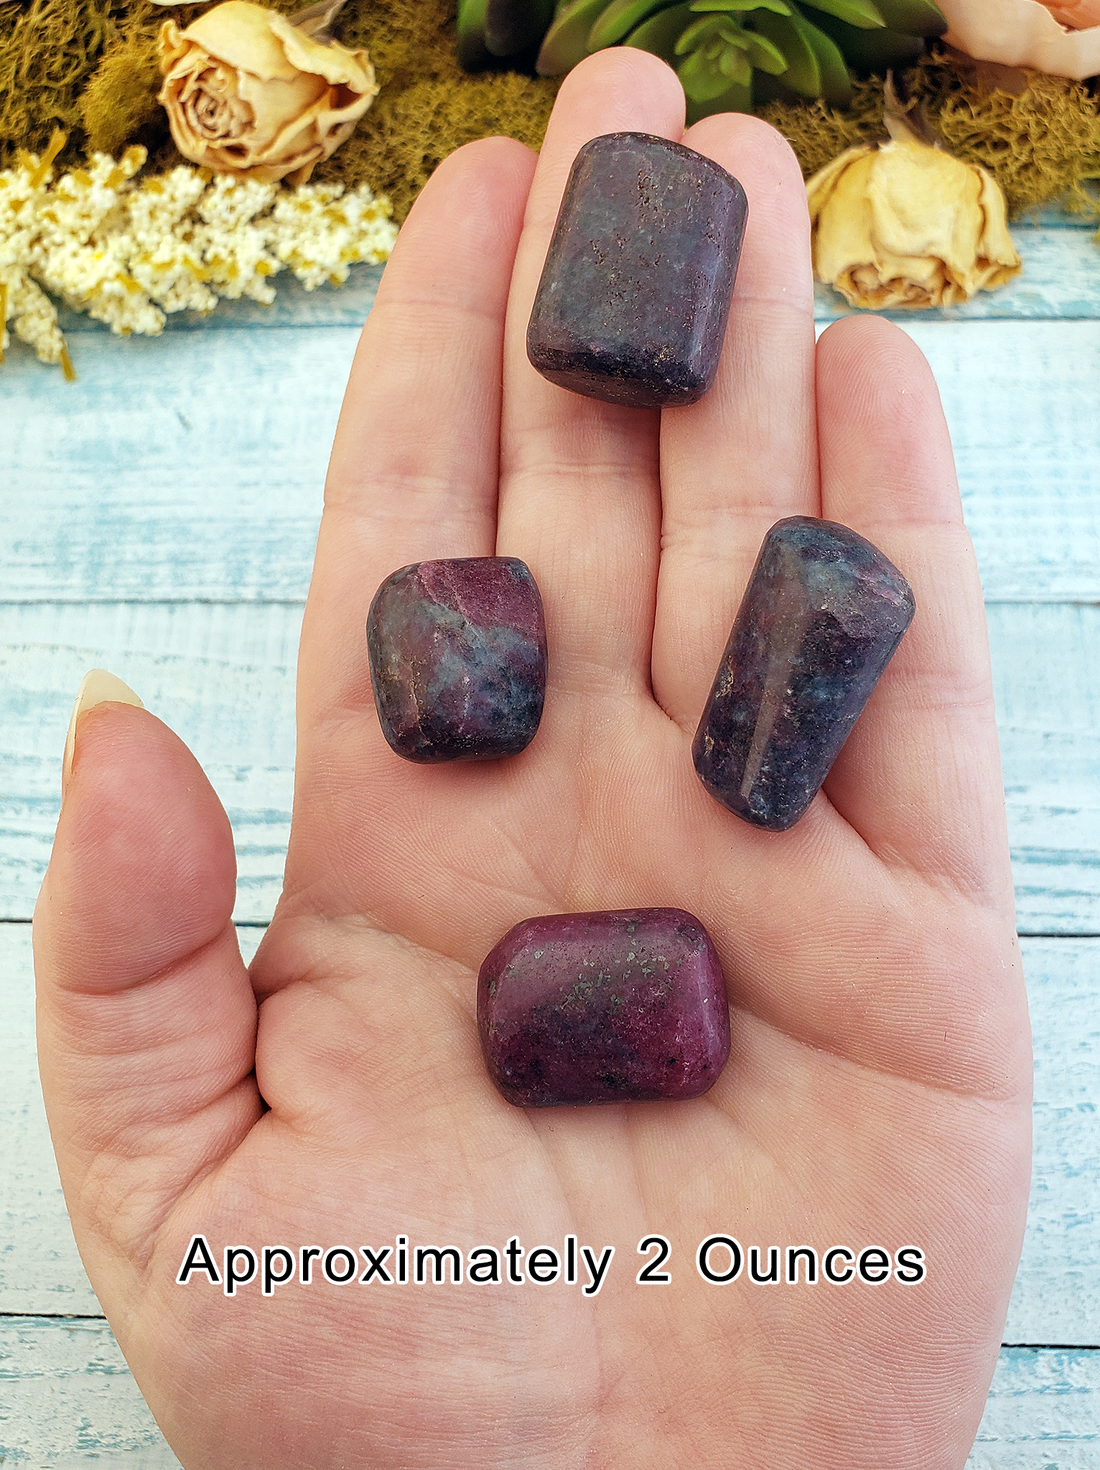 Ruby Kyanite Natural Tumbled Gemstone - 2 Ounces in Hand